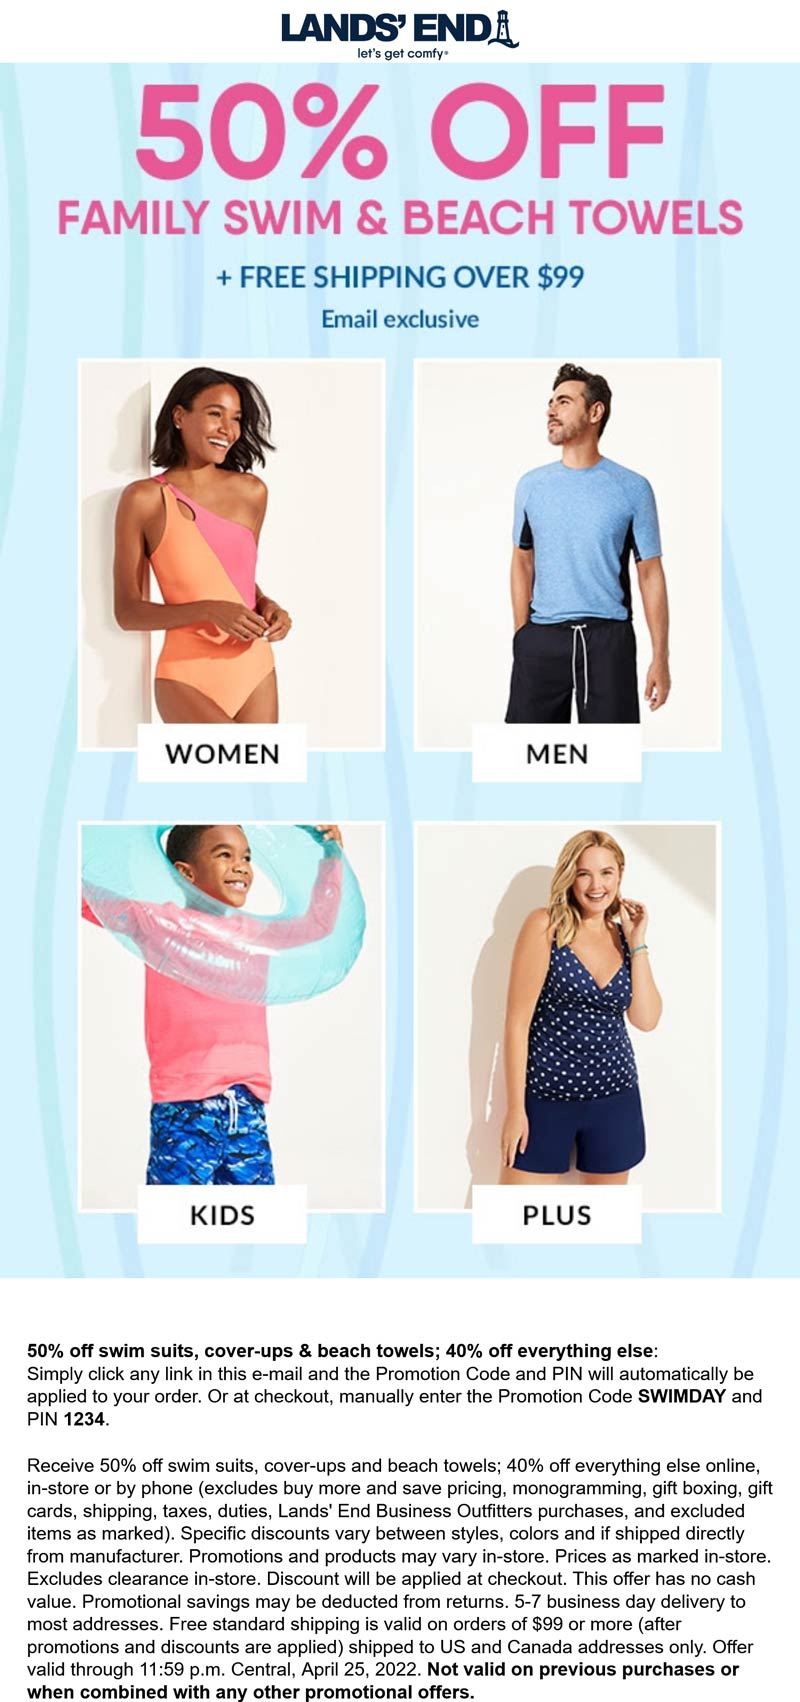 Lands End stores Coupon  50% off swim & 40% everything else today at Lands End via promo code SWIMDAY and pin 1234 #landsend 